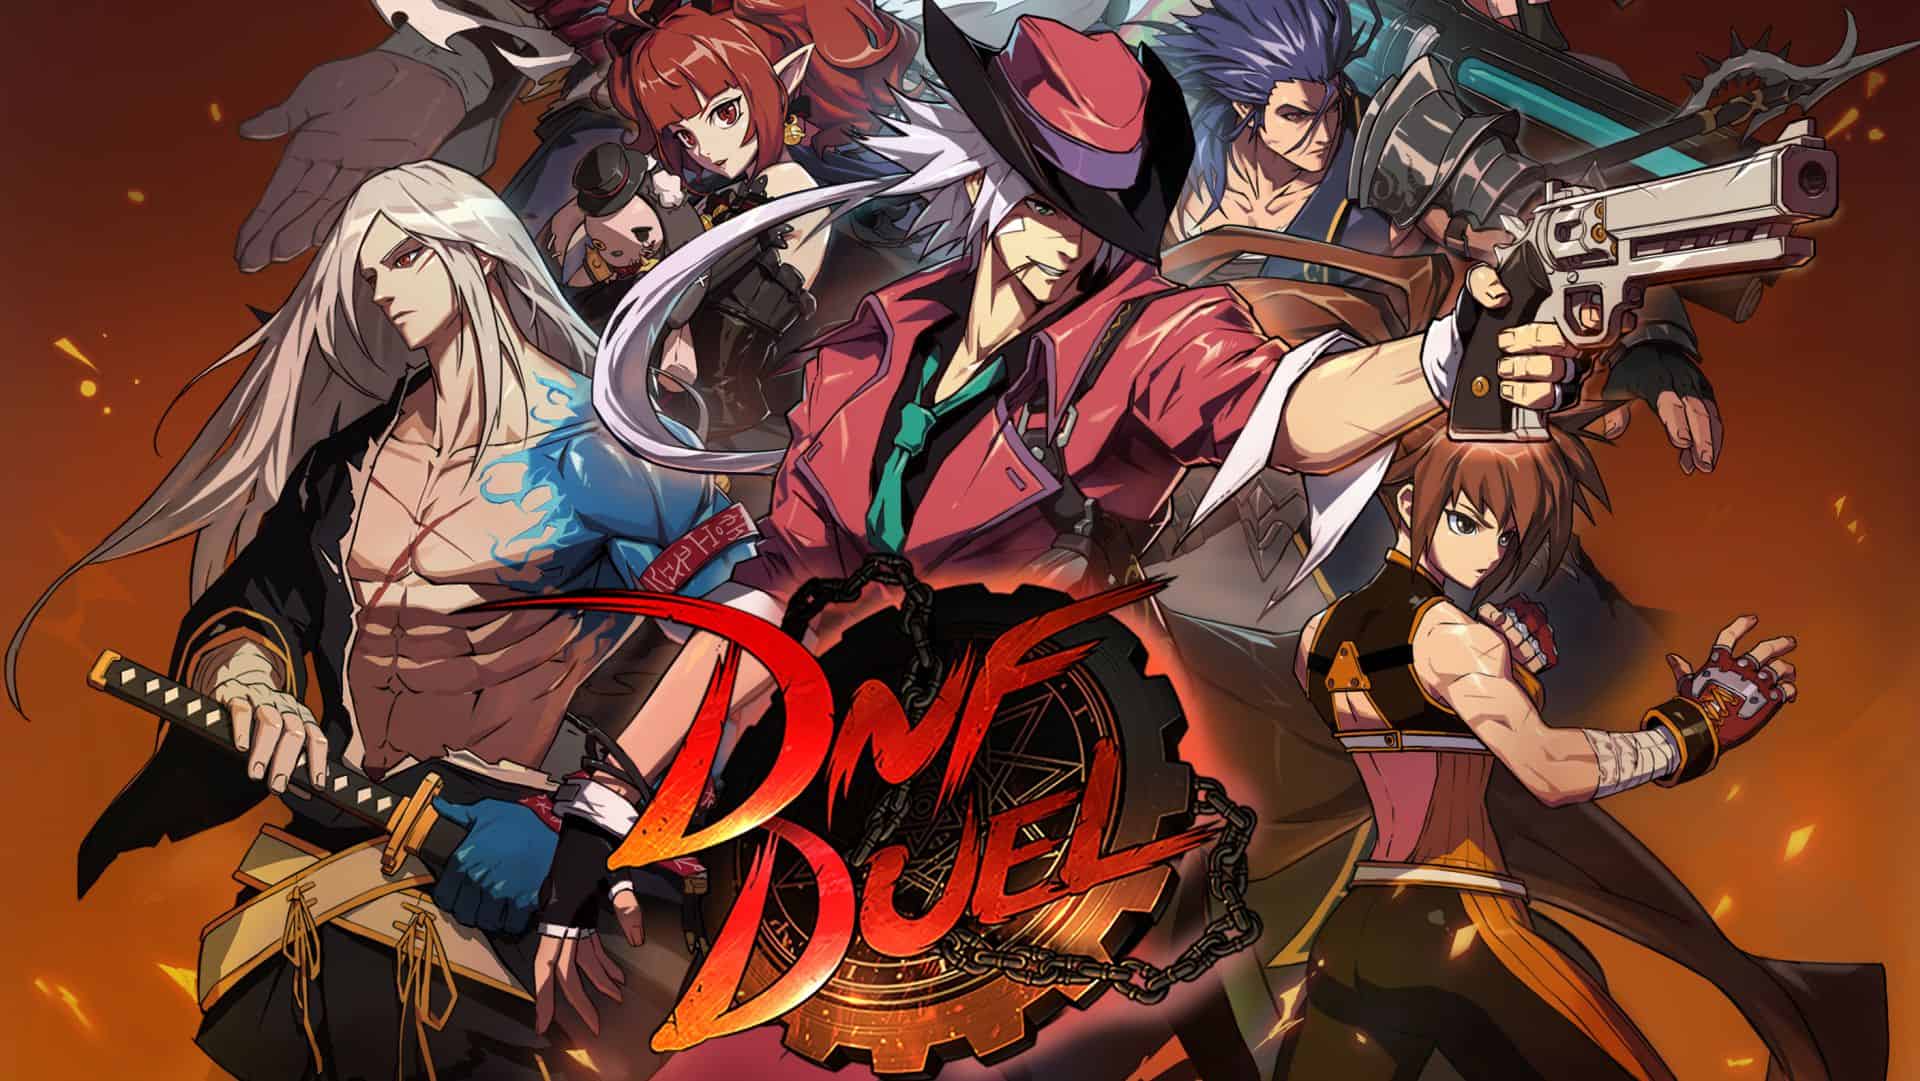 Is DNF Duel cross platform? Crossplay updates for PS5 and PC